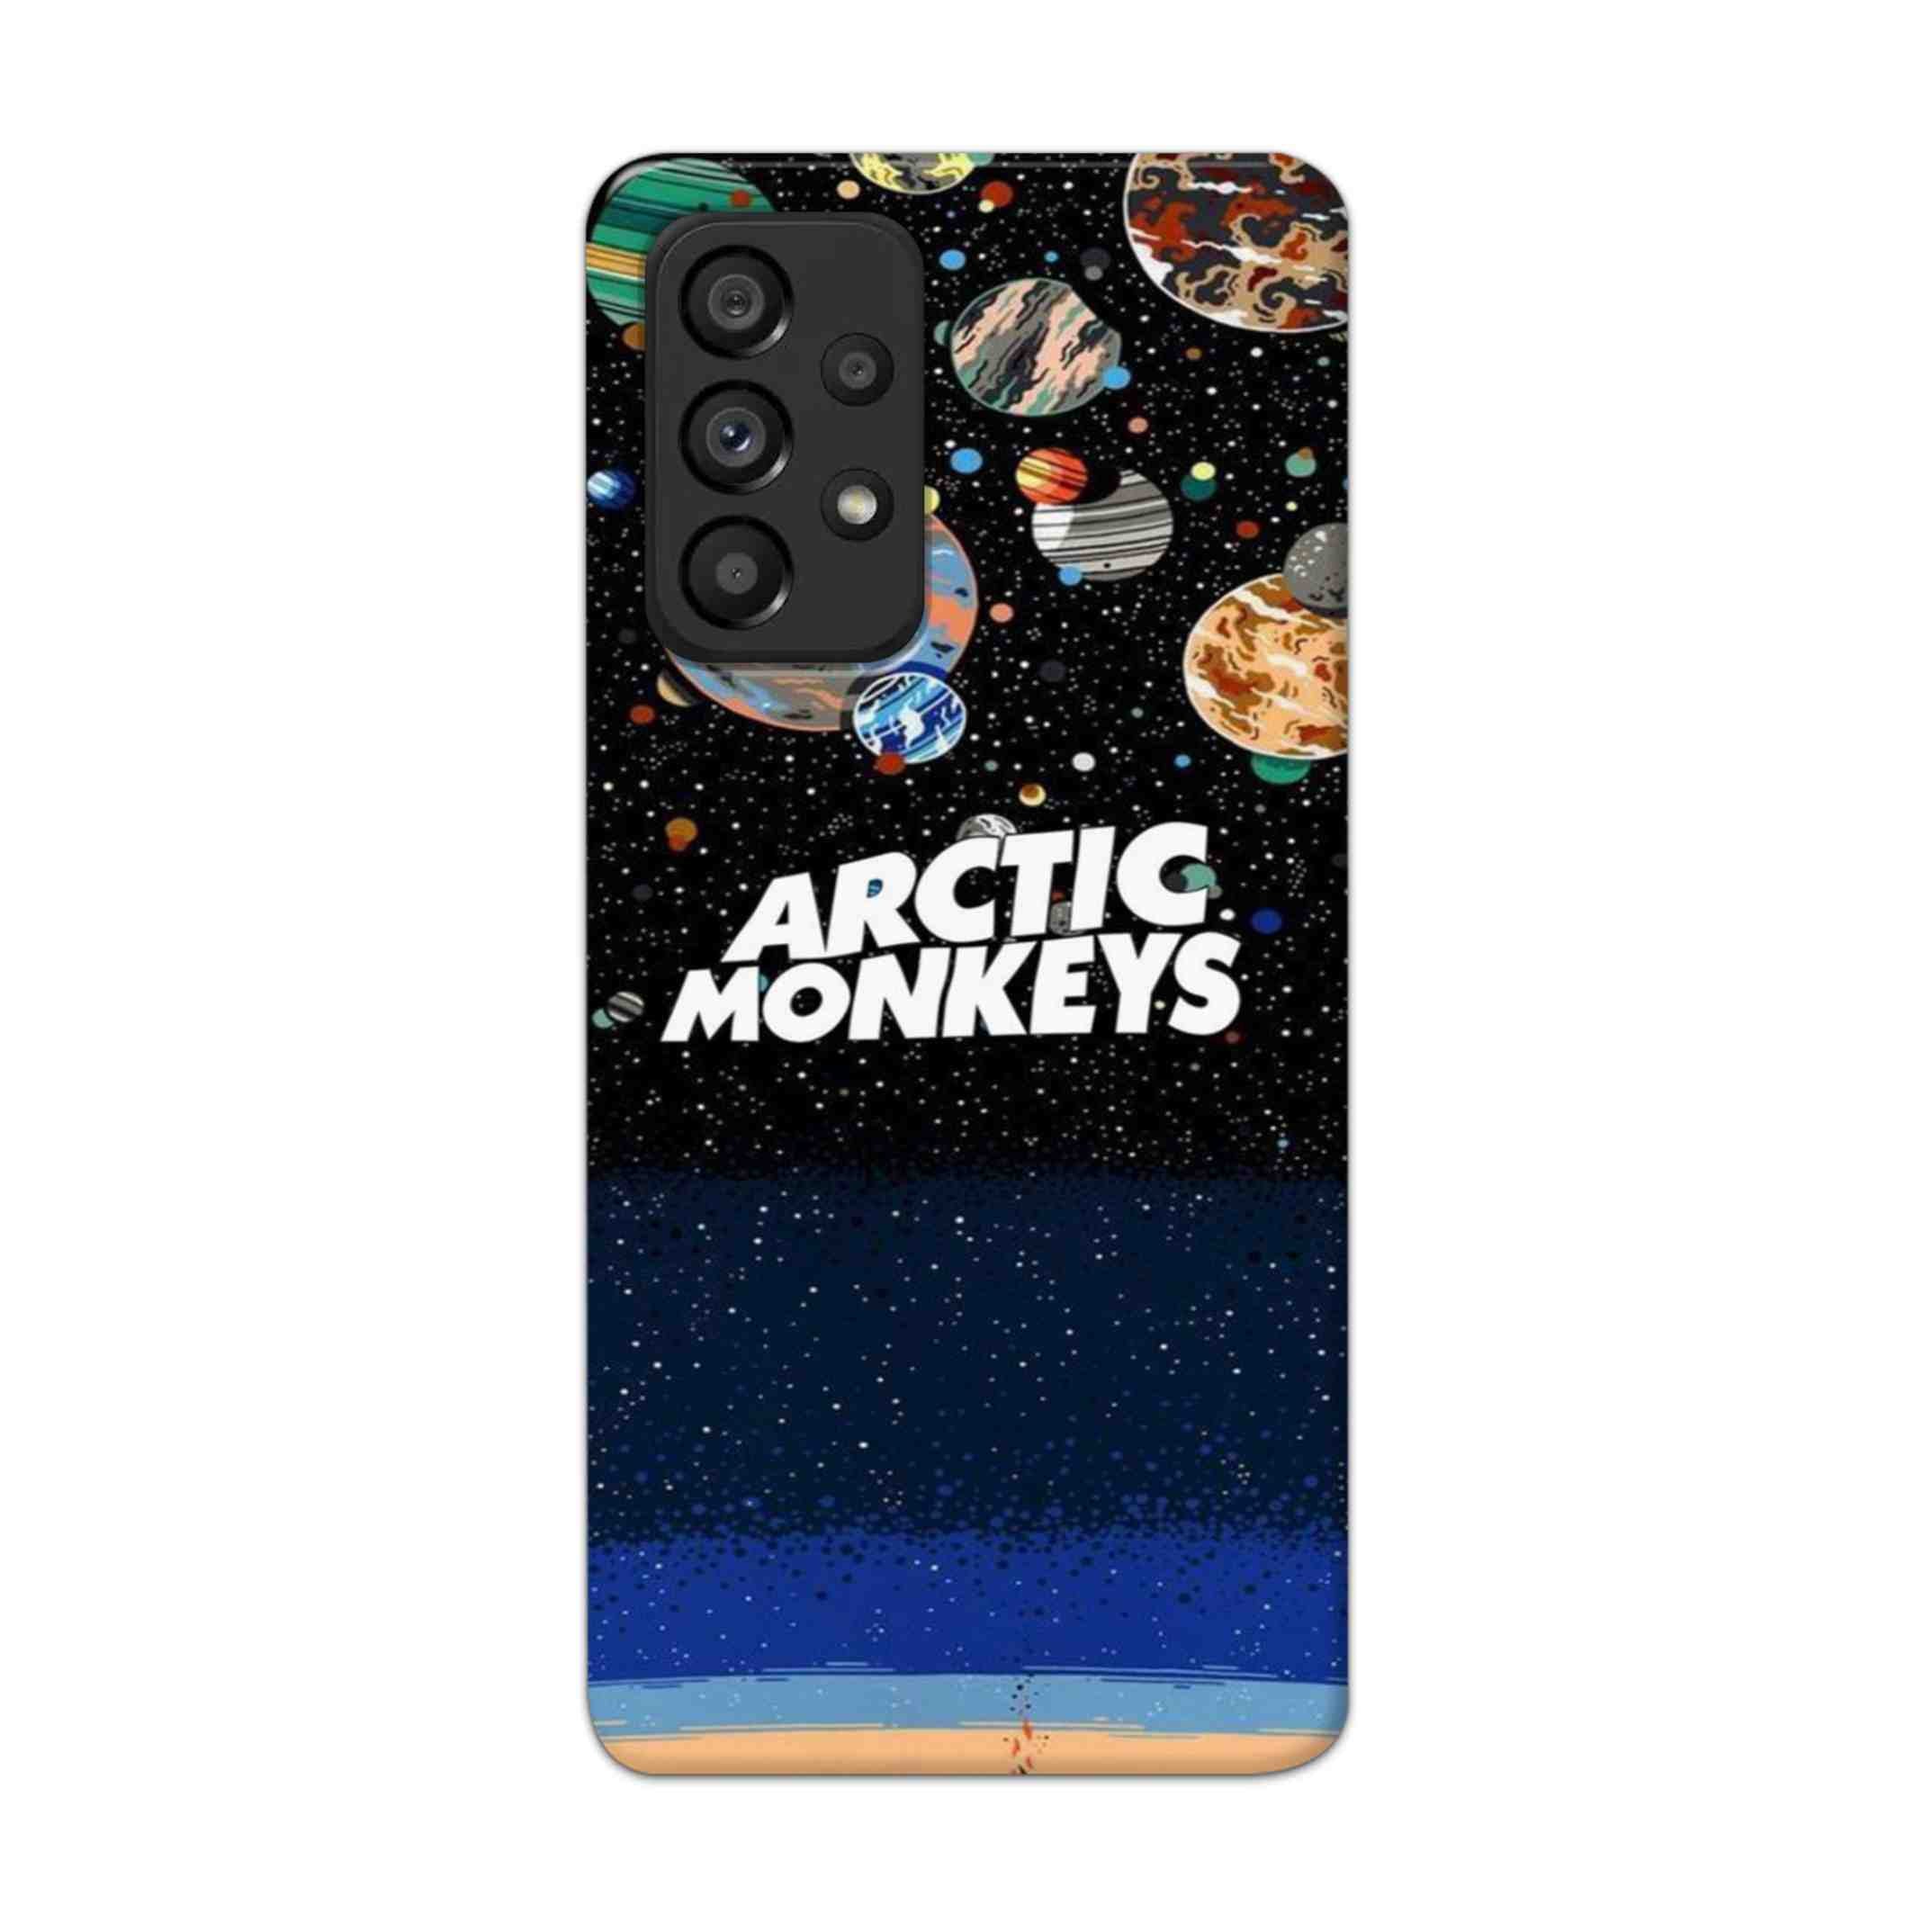 Buy Artic Monkeys Hard Back Mobile Phone Case Cover For Samsung Galaxy A53 5G Online